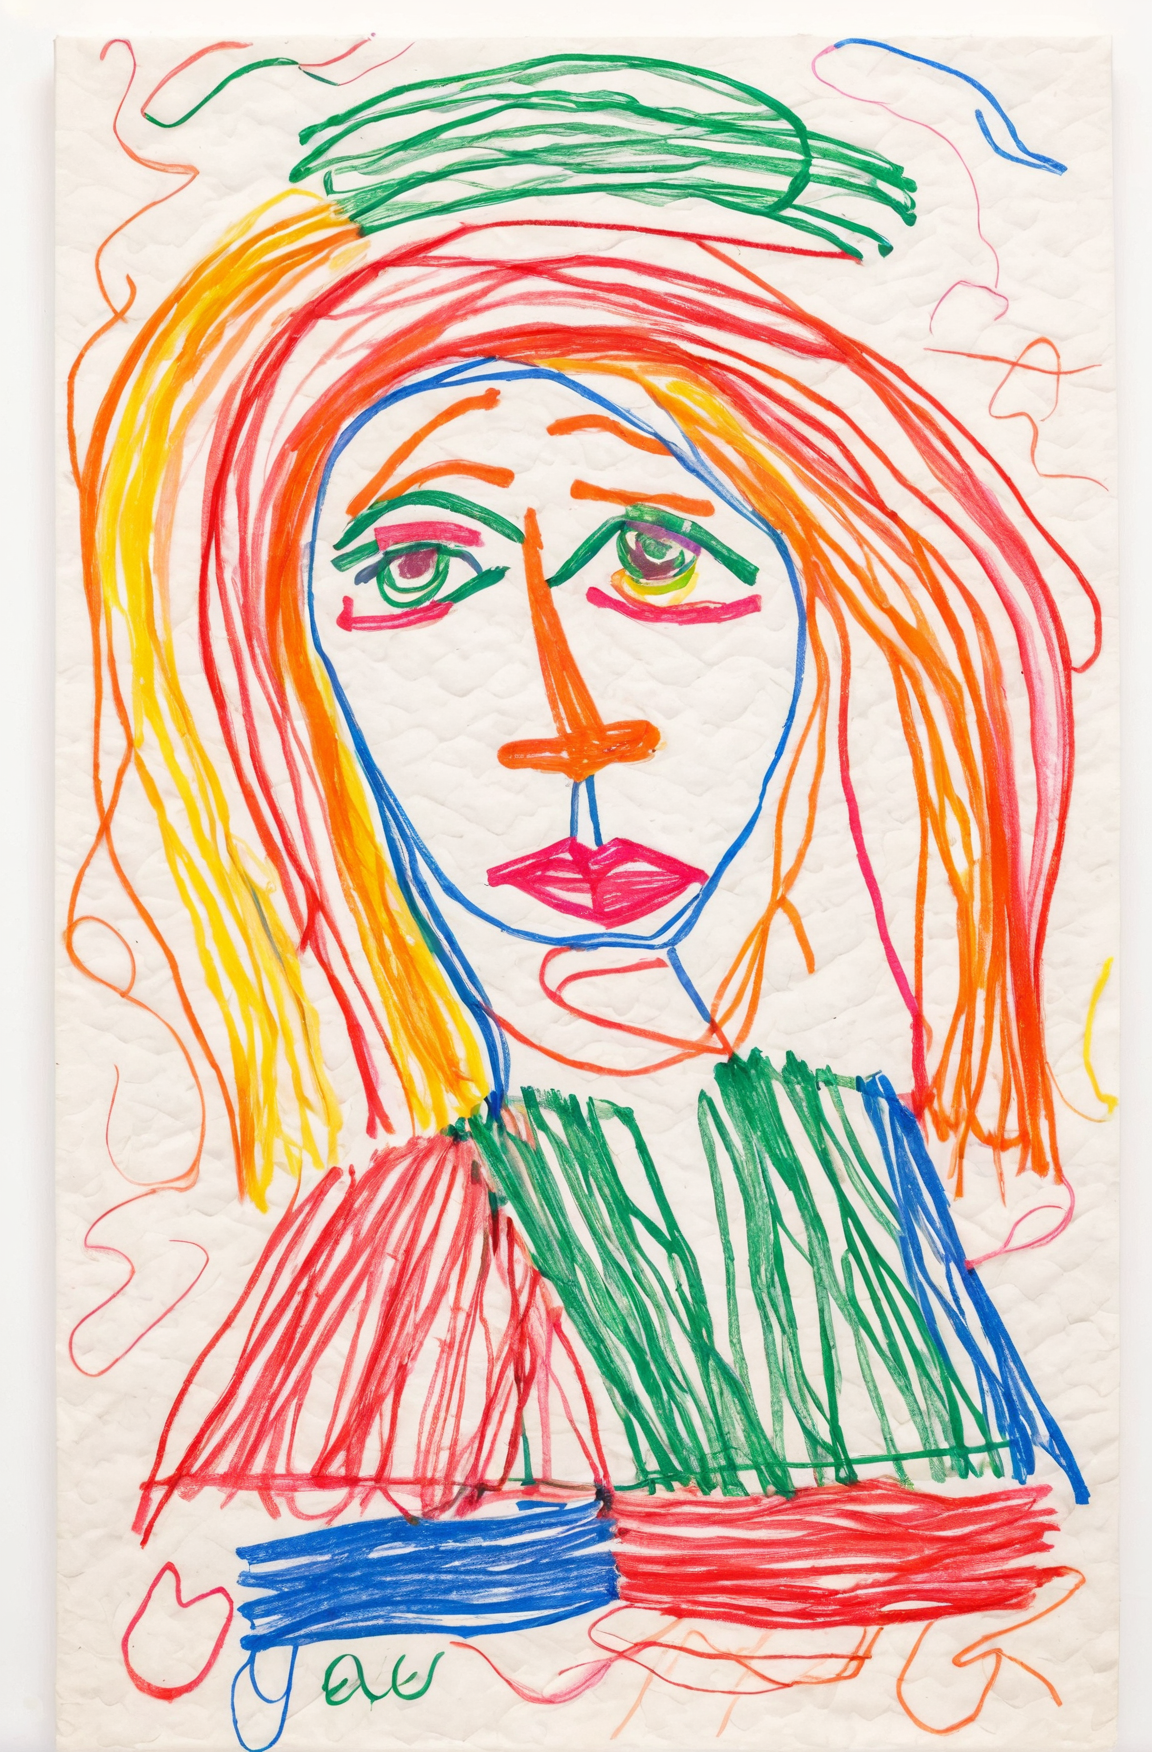 chaotic scribbles of a colorful crayon drawing of an ugly woman, done by a 3 year old on white construction paper.